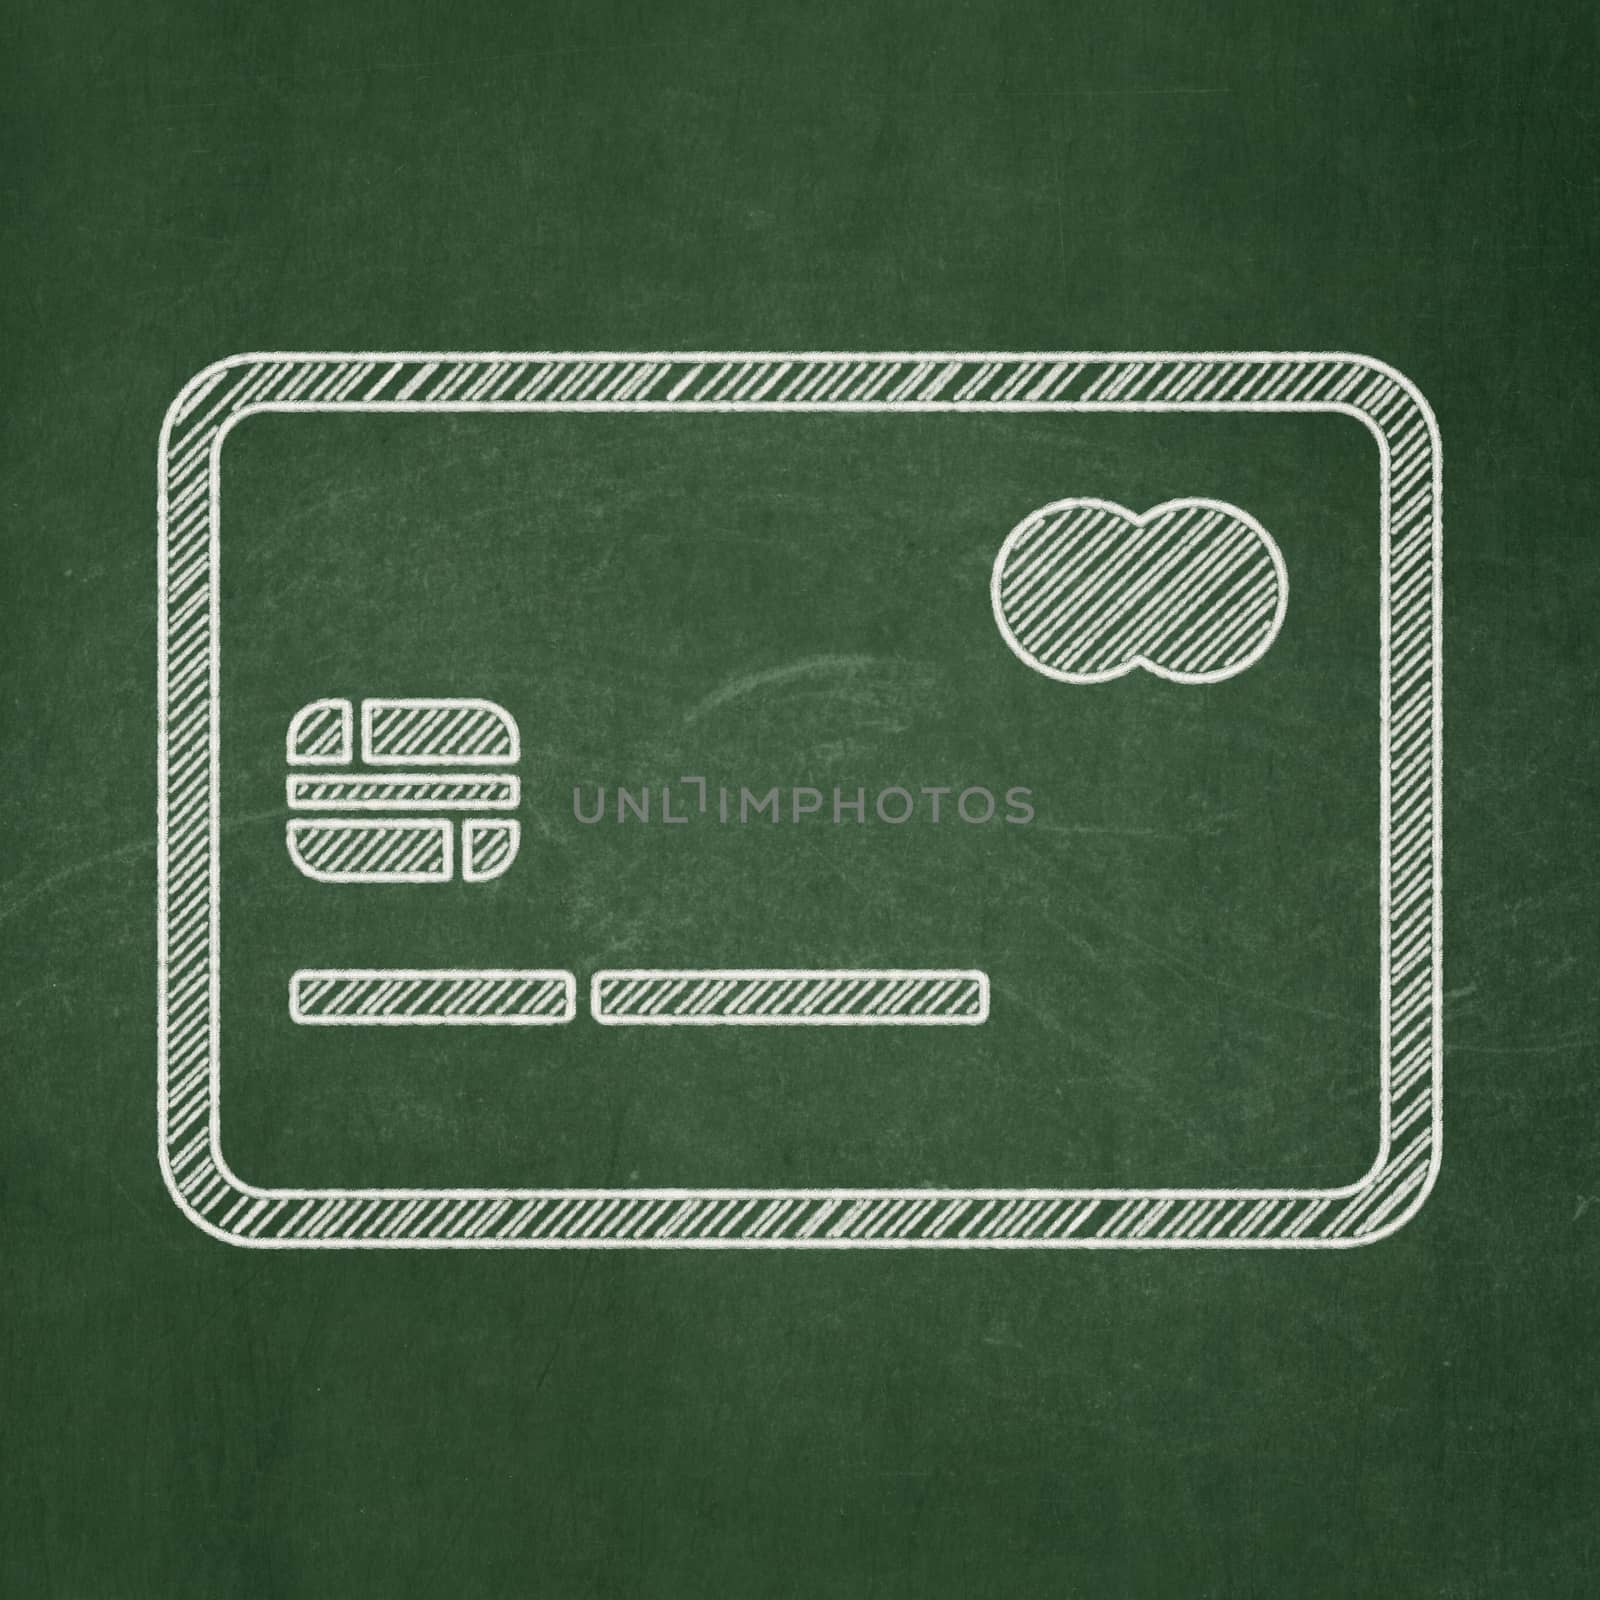 Money concept: Credit Card icon on Green chalkboard background